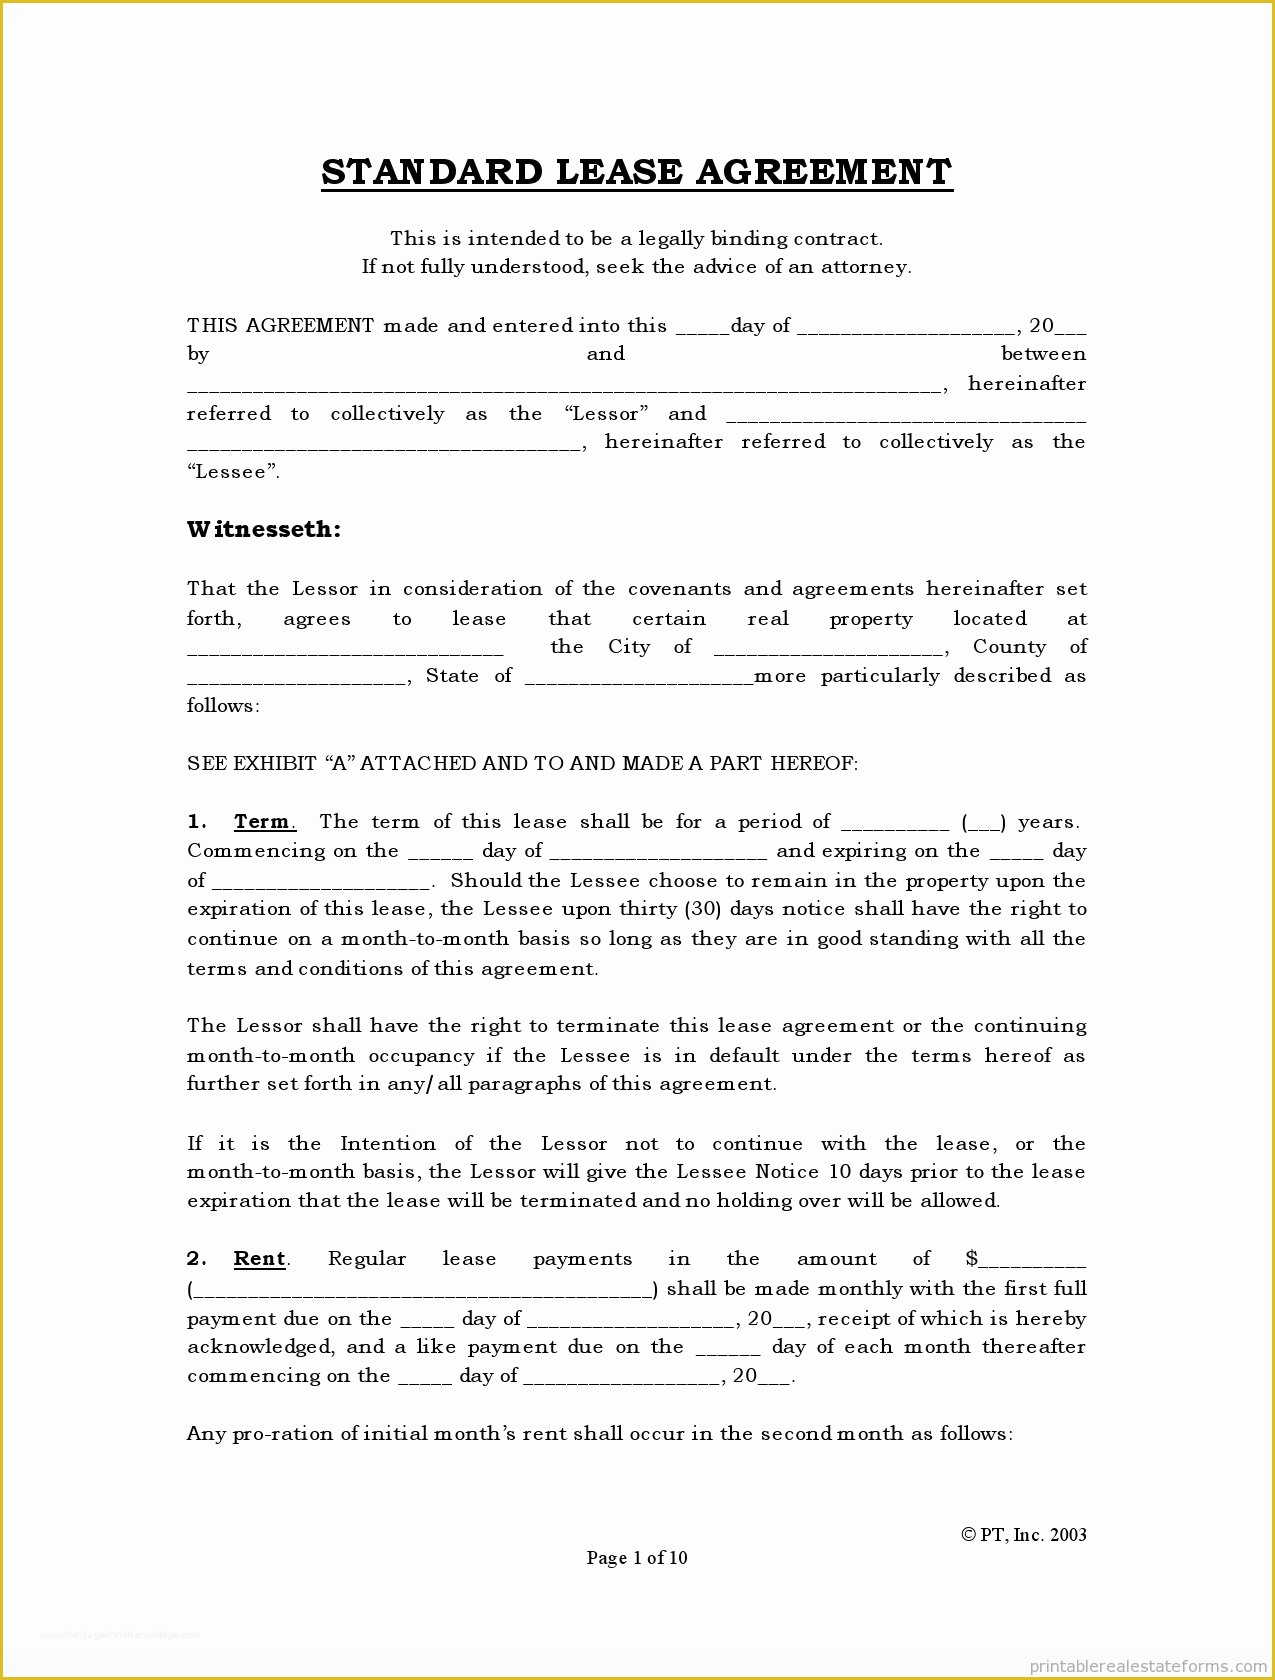 Free Commercial Lease Agreement Template Download Of Free Rental Agreements to Print